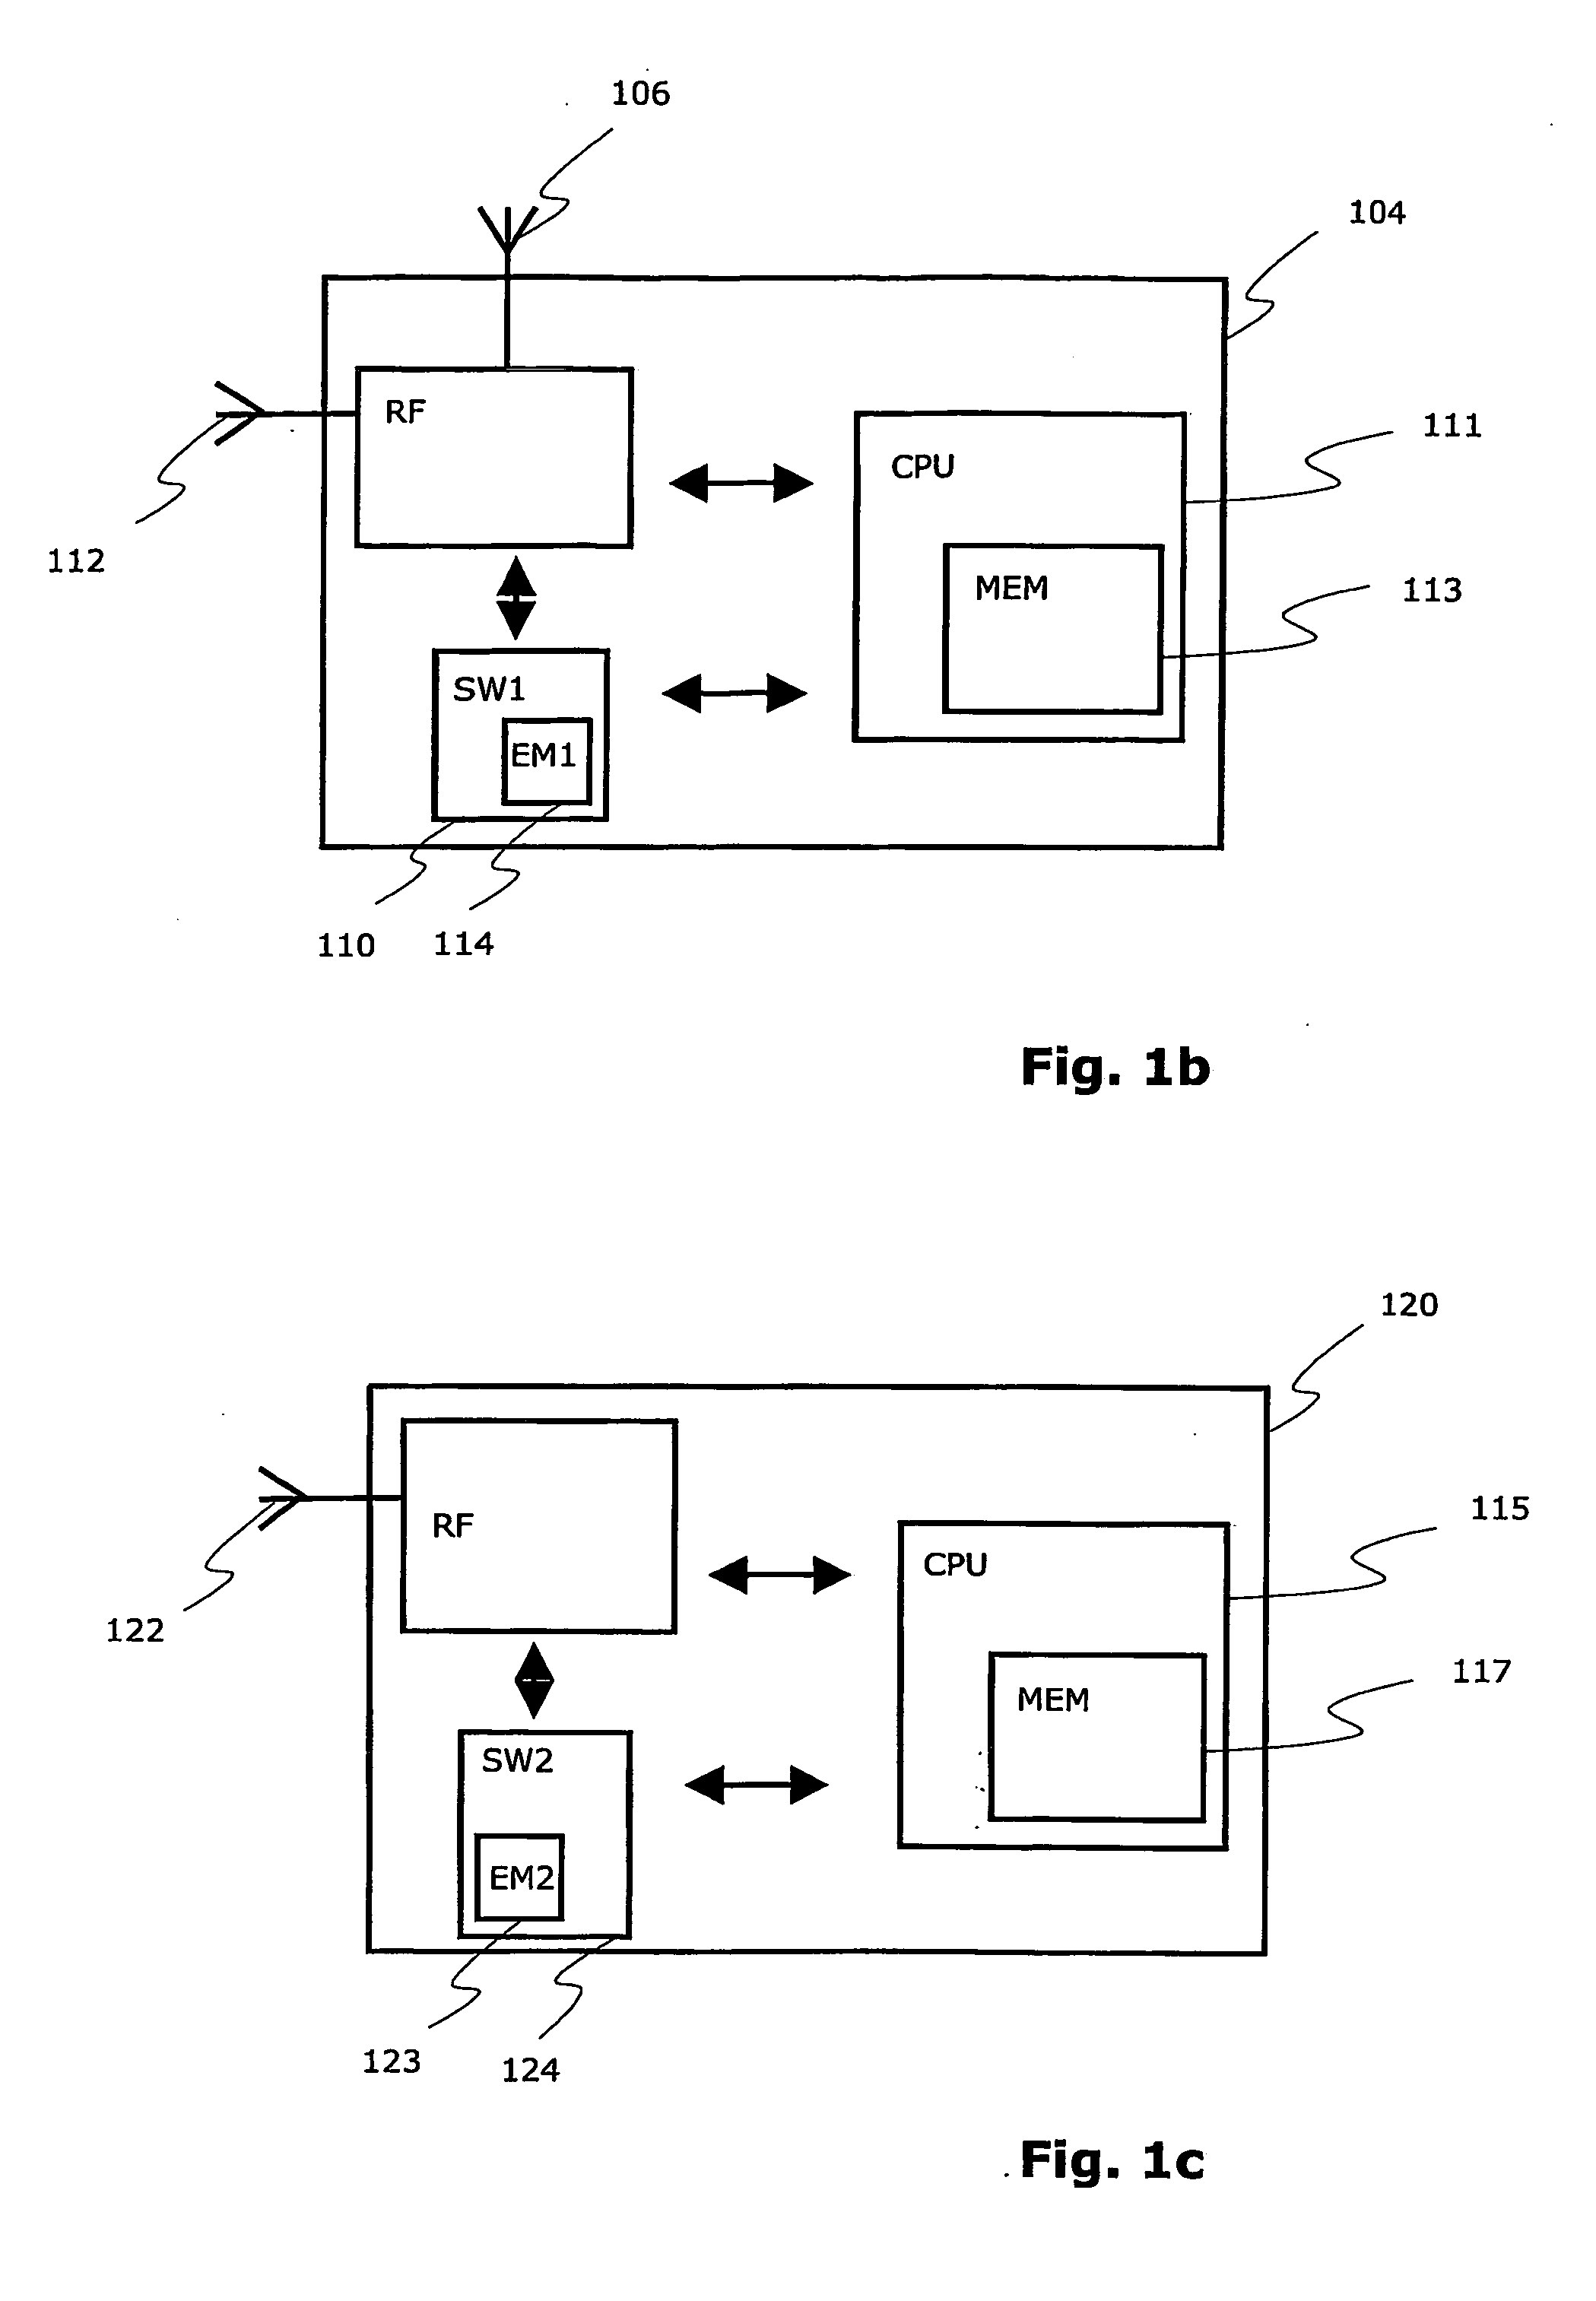 Method And Arrangements For Wireless Communication Between A Vehicle And A Terrestrial Communication System